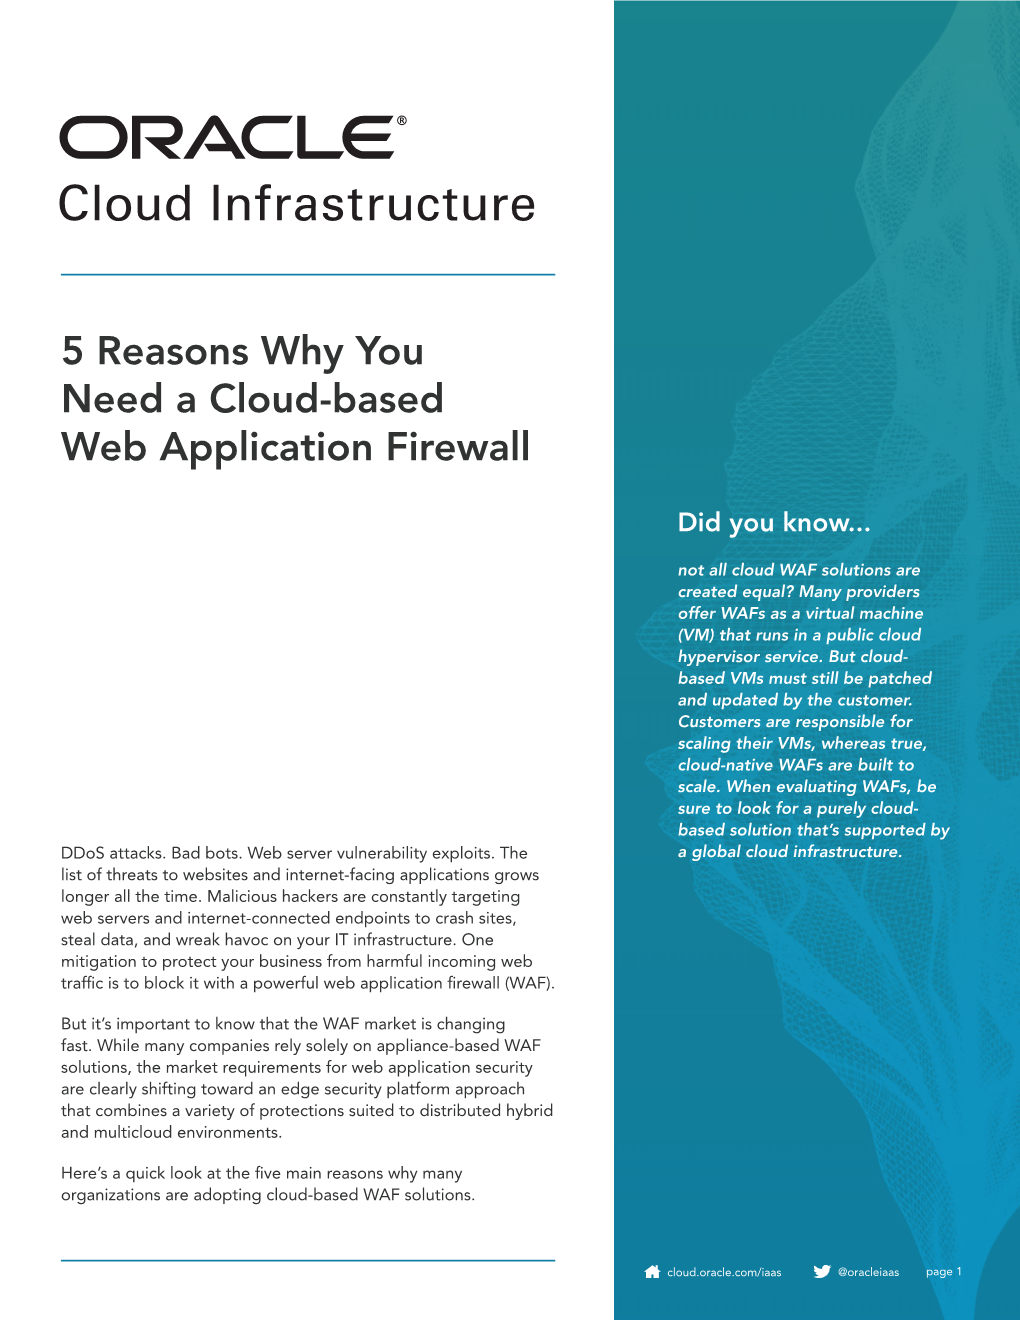 5 Reasons Why You Need a Cloud-Based Web Application Firewall